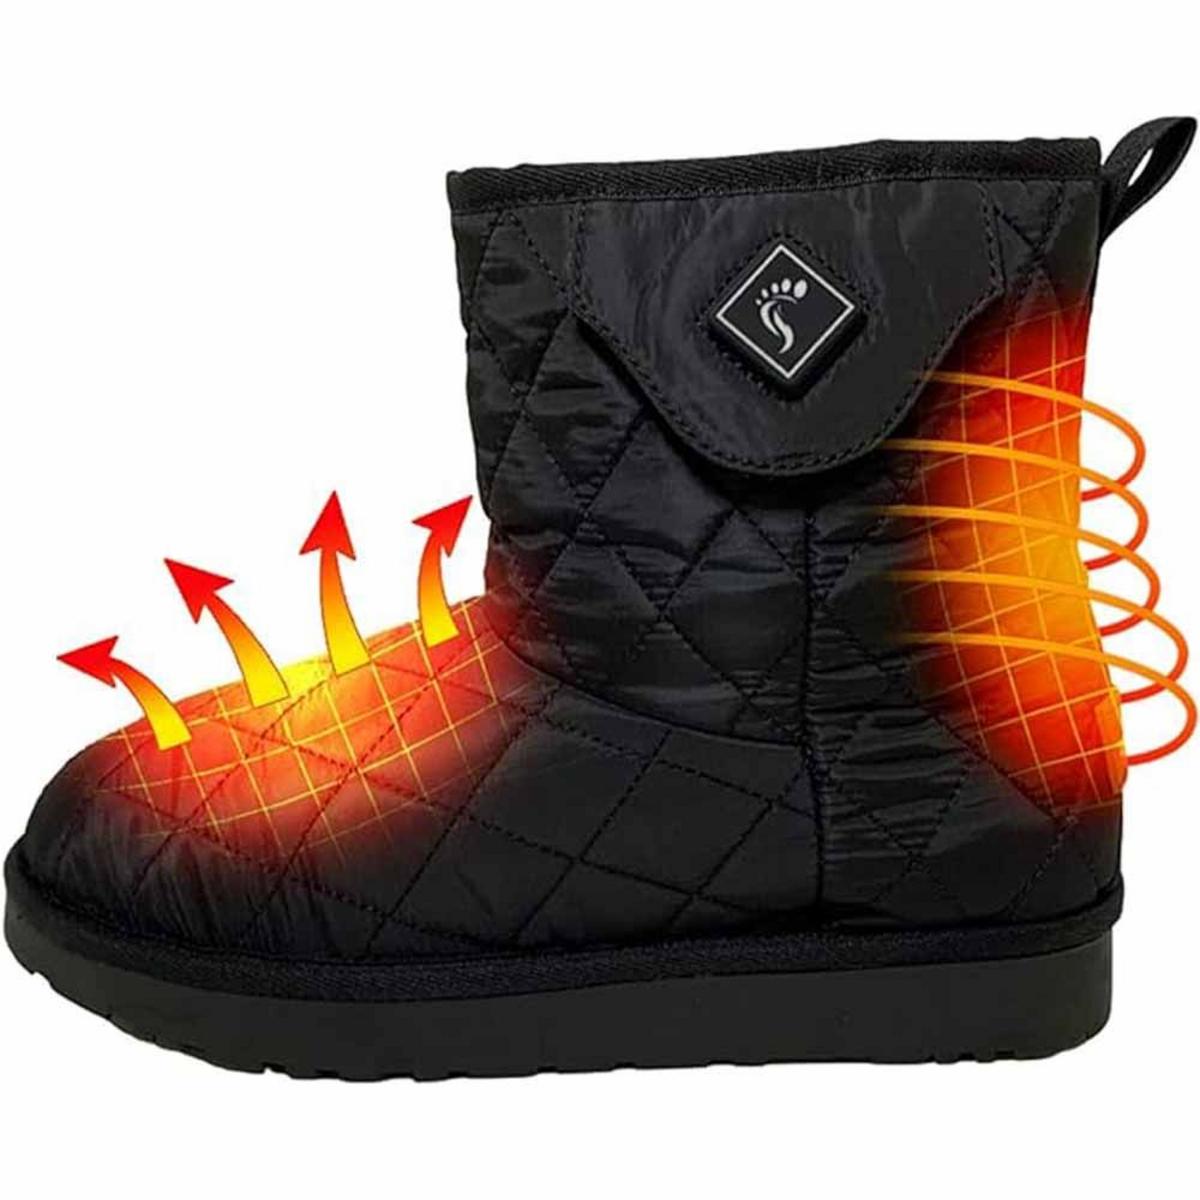 ThermalStep Rechargeable Heated Boots